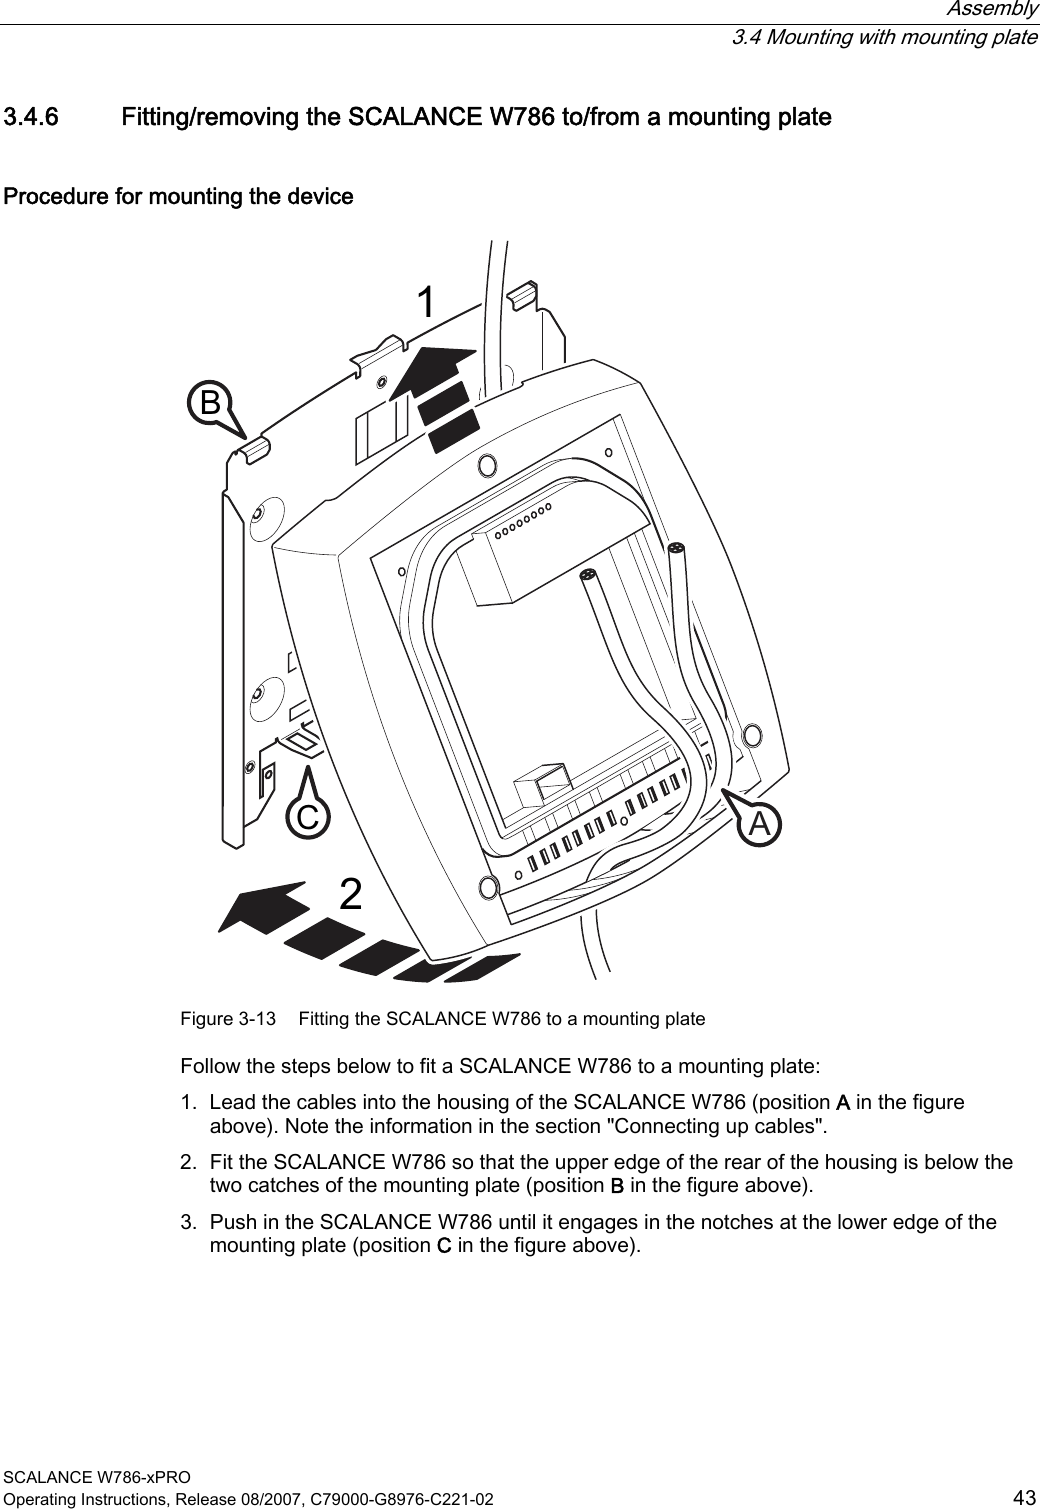  Assembly  3.4 Mounting with mounting plate SCALANCE W786-xPRO Operating Instructions, Release 08/2007, C79000-G8976-C221-02  43 3.4.6 Fitting/removing the SCALANCE W786 to/from a mounting plate Procedure for mounting the device 12CAB Figure 3-13  Fitting the SCALANCE W786 to a mounting plate Follow the steps below to fit a SCALANCE W786 to a mounting plate: 1. Lead the cables into the housing of the SCALANCE W786 (position A in the figure above). Note the information in the section &quot;Connecting up cables&quot;. 2. Fit the SCALANCE W786 so that the upper edge of the rear of the housing is below the two catches of the mounting plate (position B in the figure above). 3. Push in the SCALANCE W786 until it engages in the notches at the lower edge of the mounting plate (position C in the figure above). 